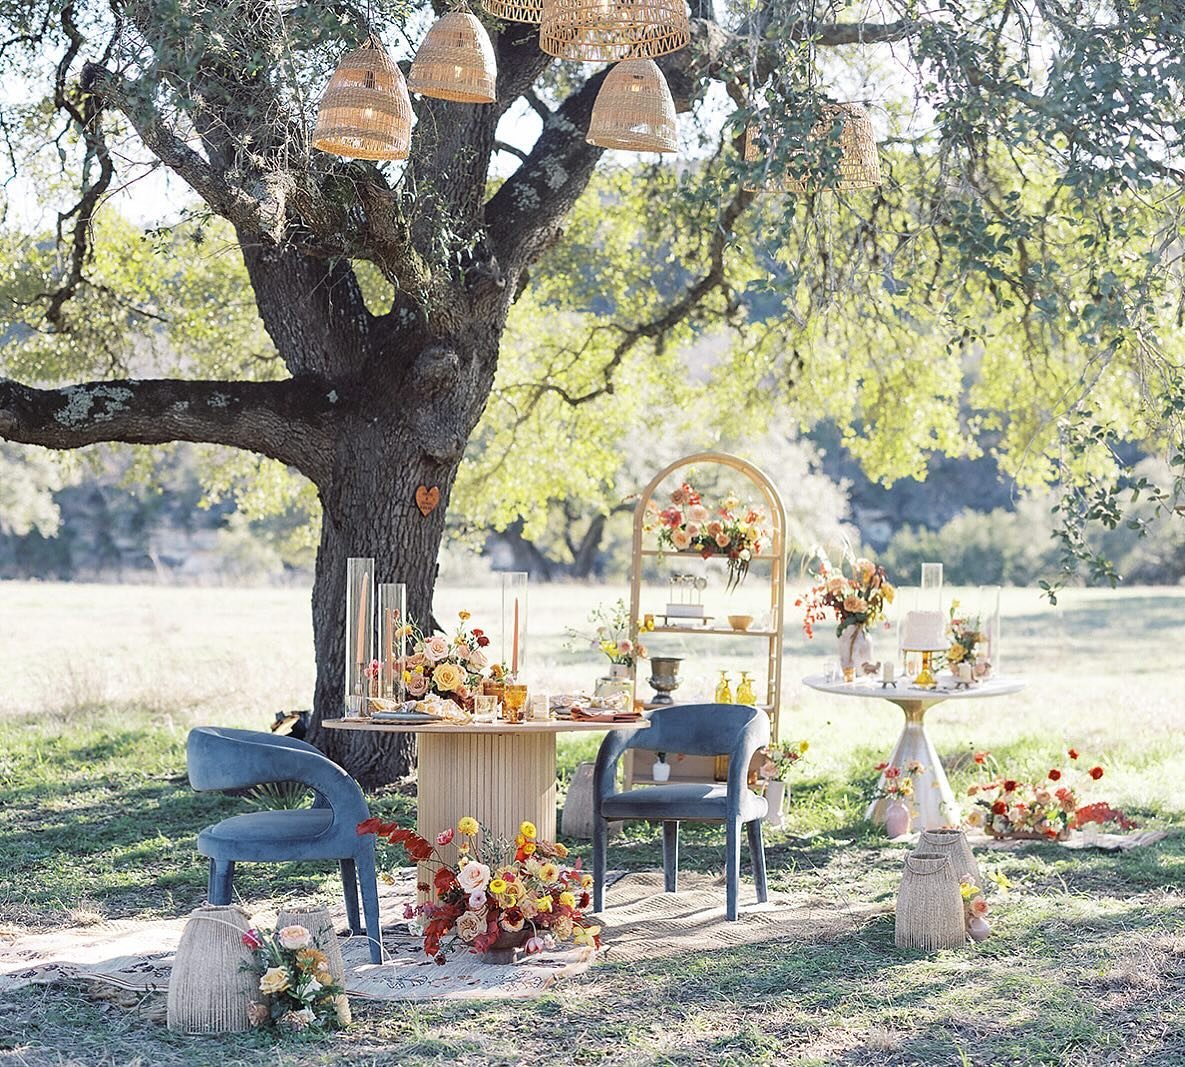 A full daytime view of this stunning and romantic dinner for two! We loved everything about this, so special for sure! Event Planning and design: @minteventdesign
Rentals: @beelavish
Lighting: @filoproductionsatx 
Florals: @nativebloomfloral 
Cake: @